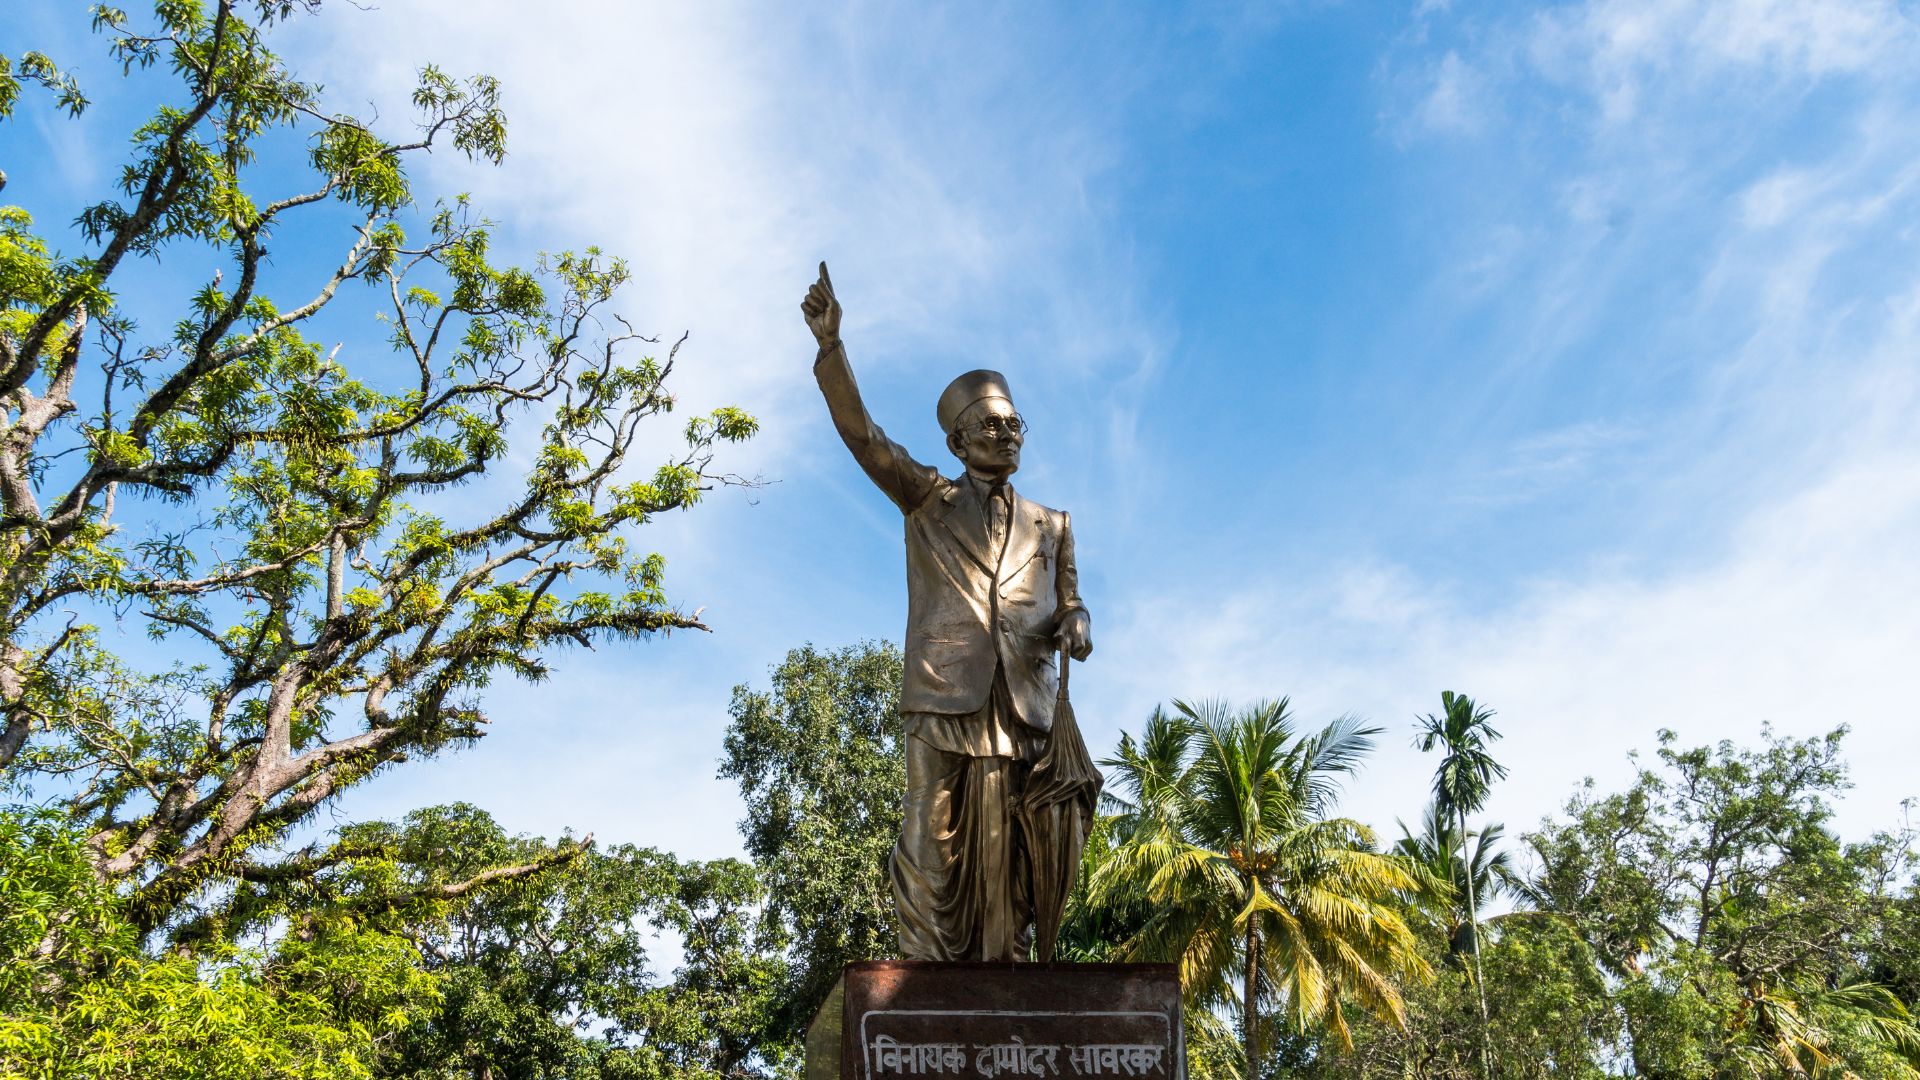 Port Blair, Andaman Islands. India. January 12, 2018: Statue of the Indian political leader Veer Savrkar, near the infamous Cellular Jail where he was exiled and tortured by the cruel British.